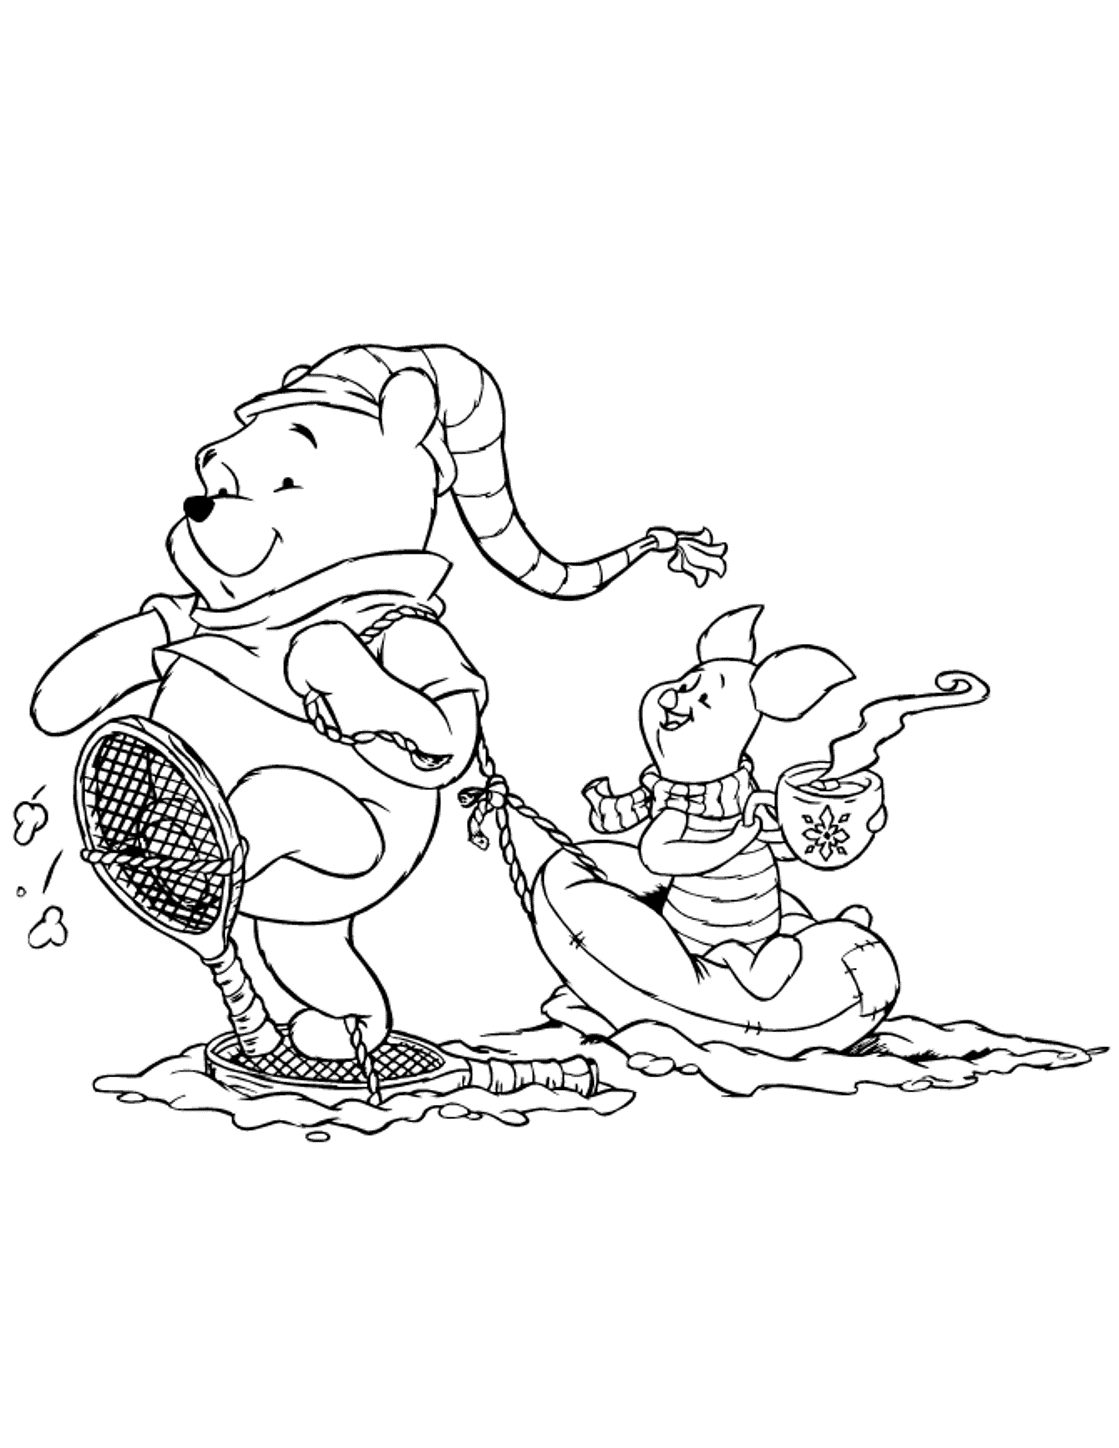 Piglet And Pooh S In Winter2e07 Coloring Page